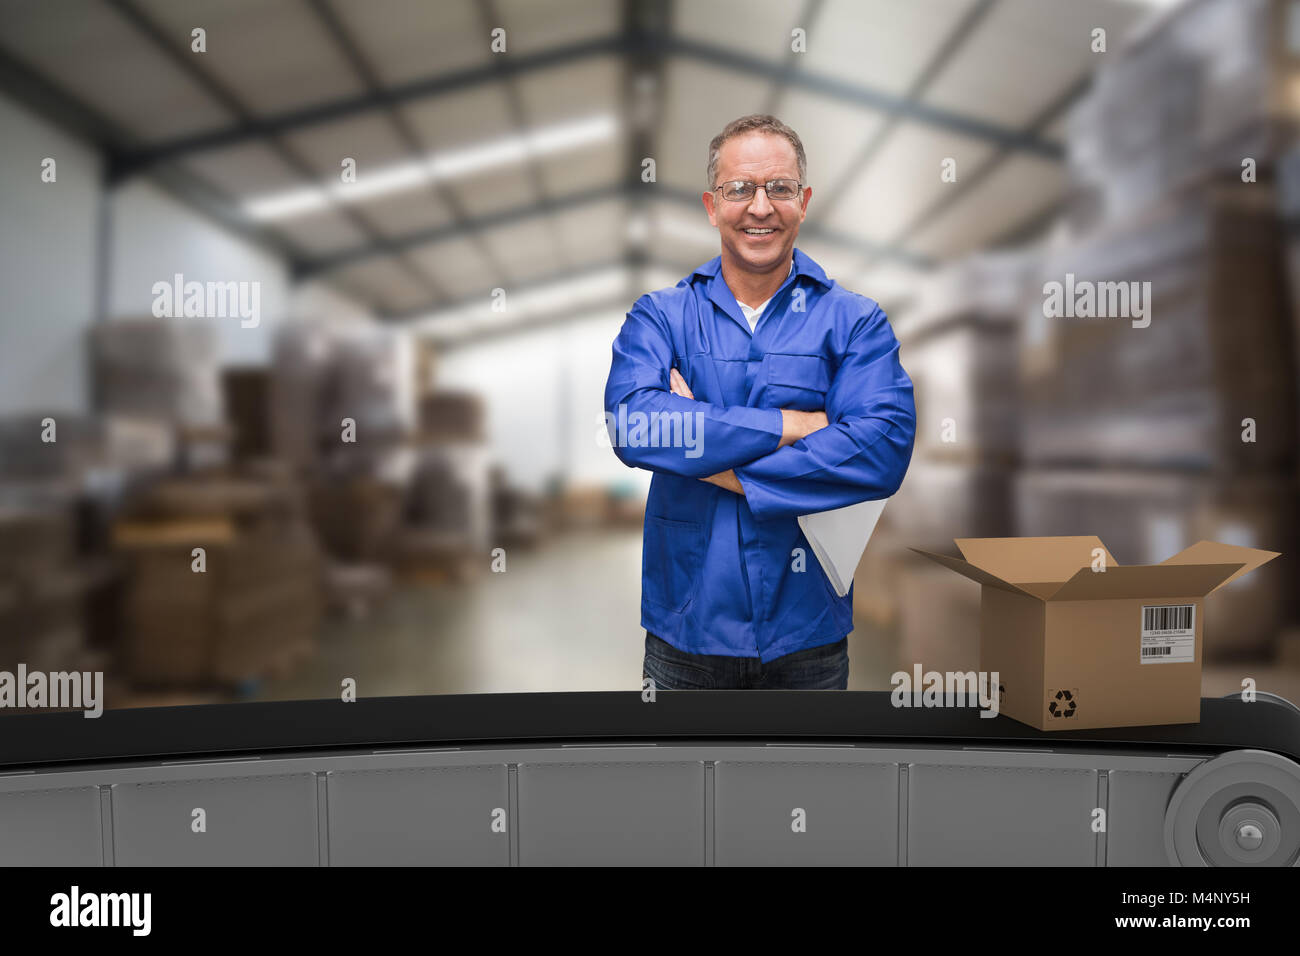 3d composite image of warehouse manager standing with arms crossed Banque D'Images